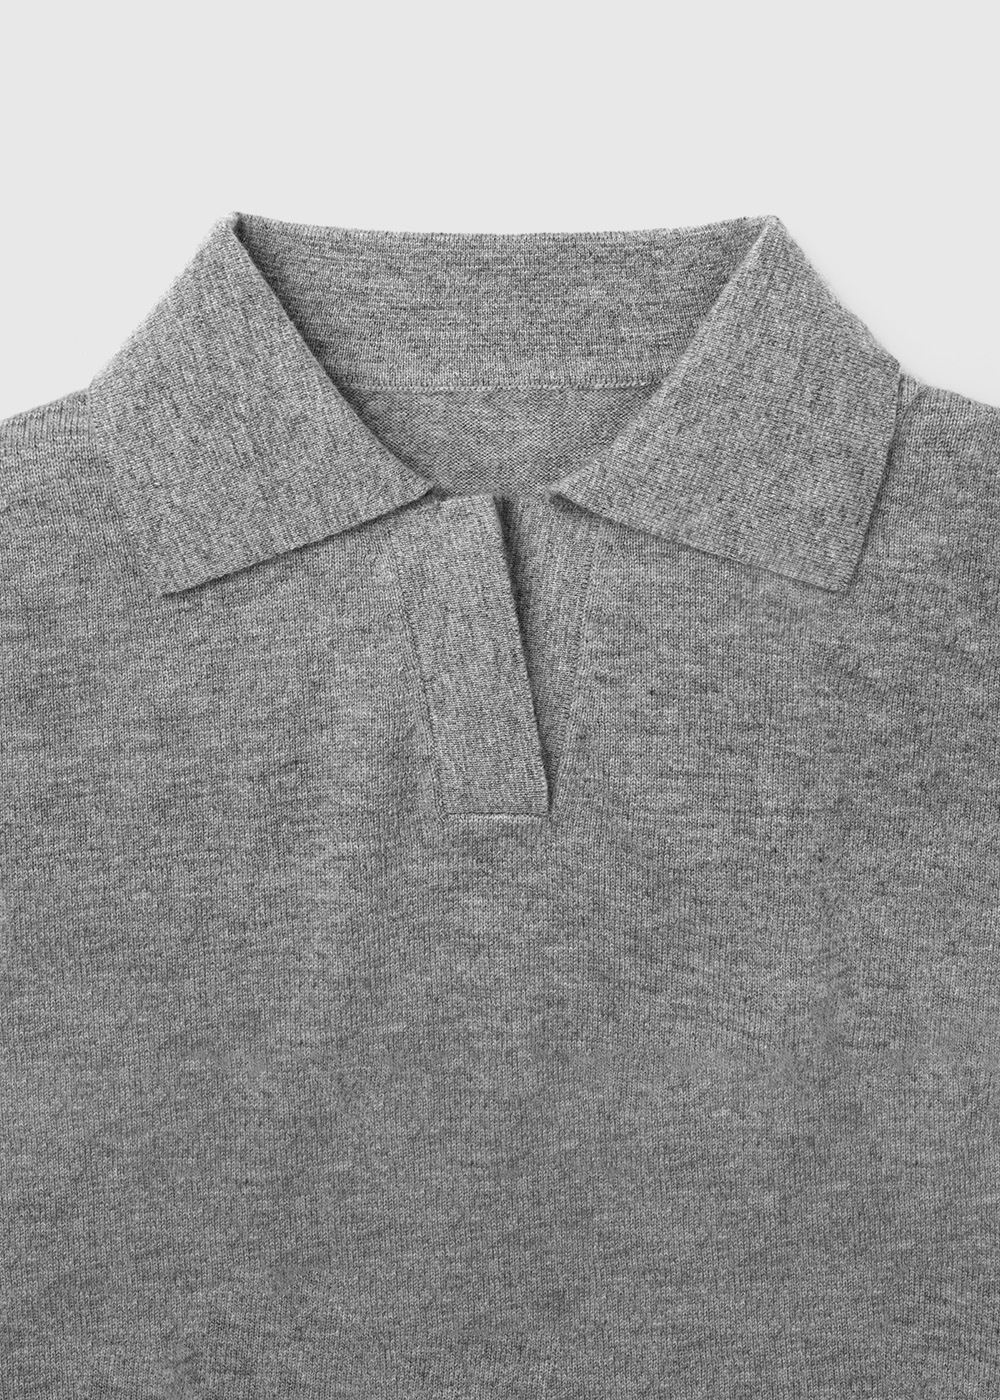 Cashmere 10% Blended Collar Knit _ gray